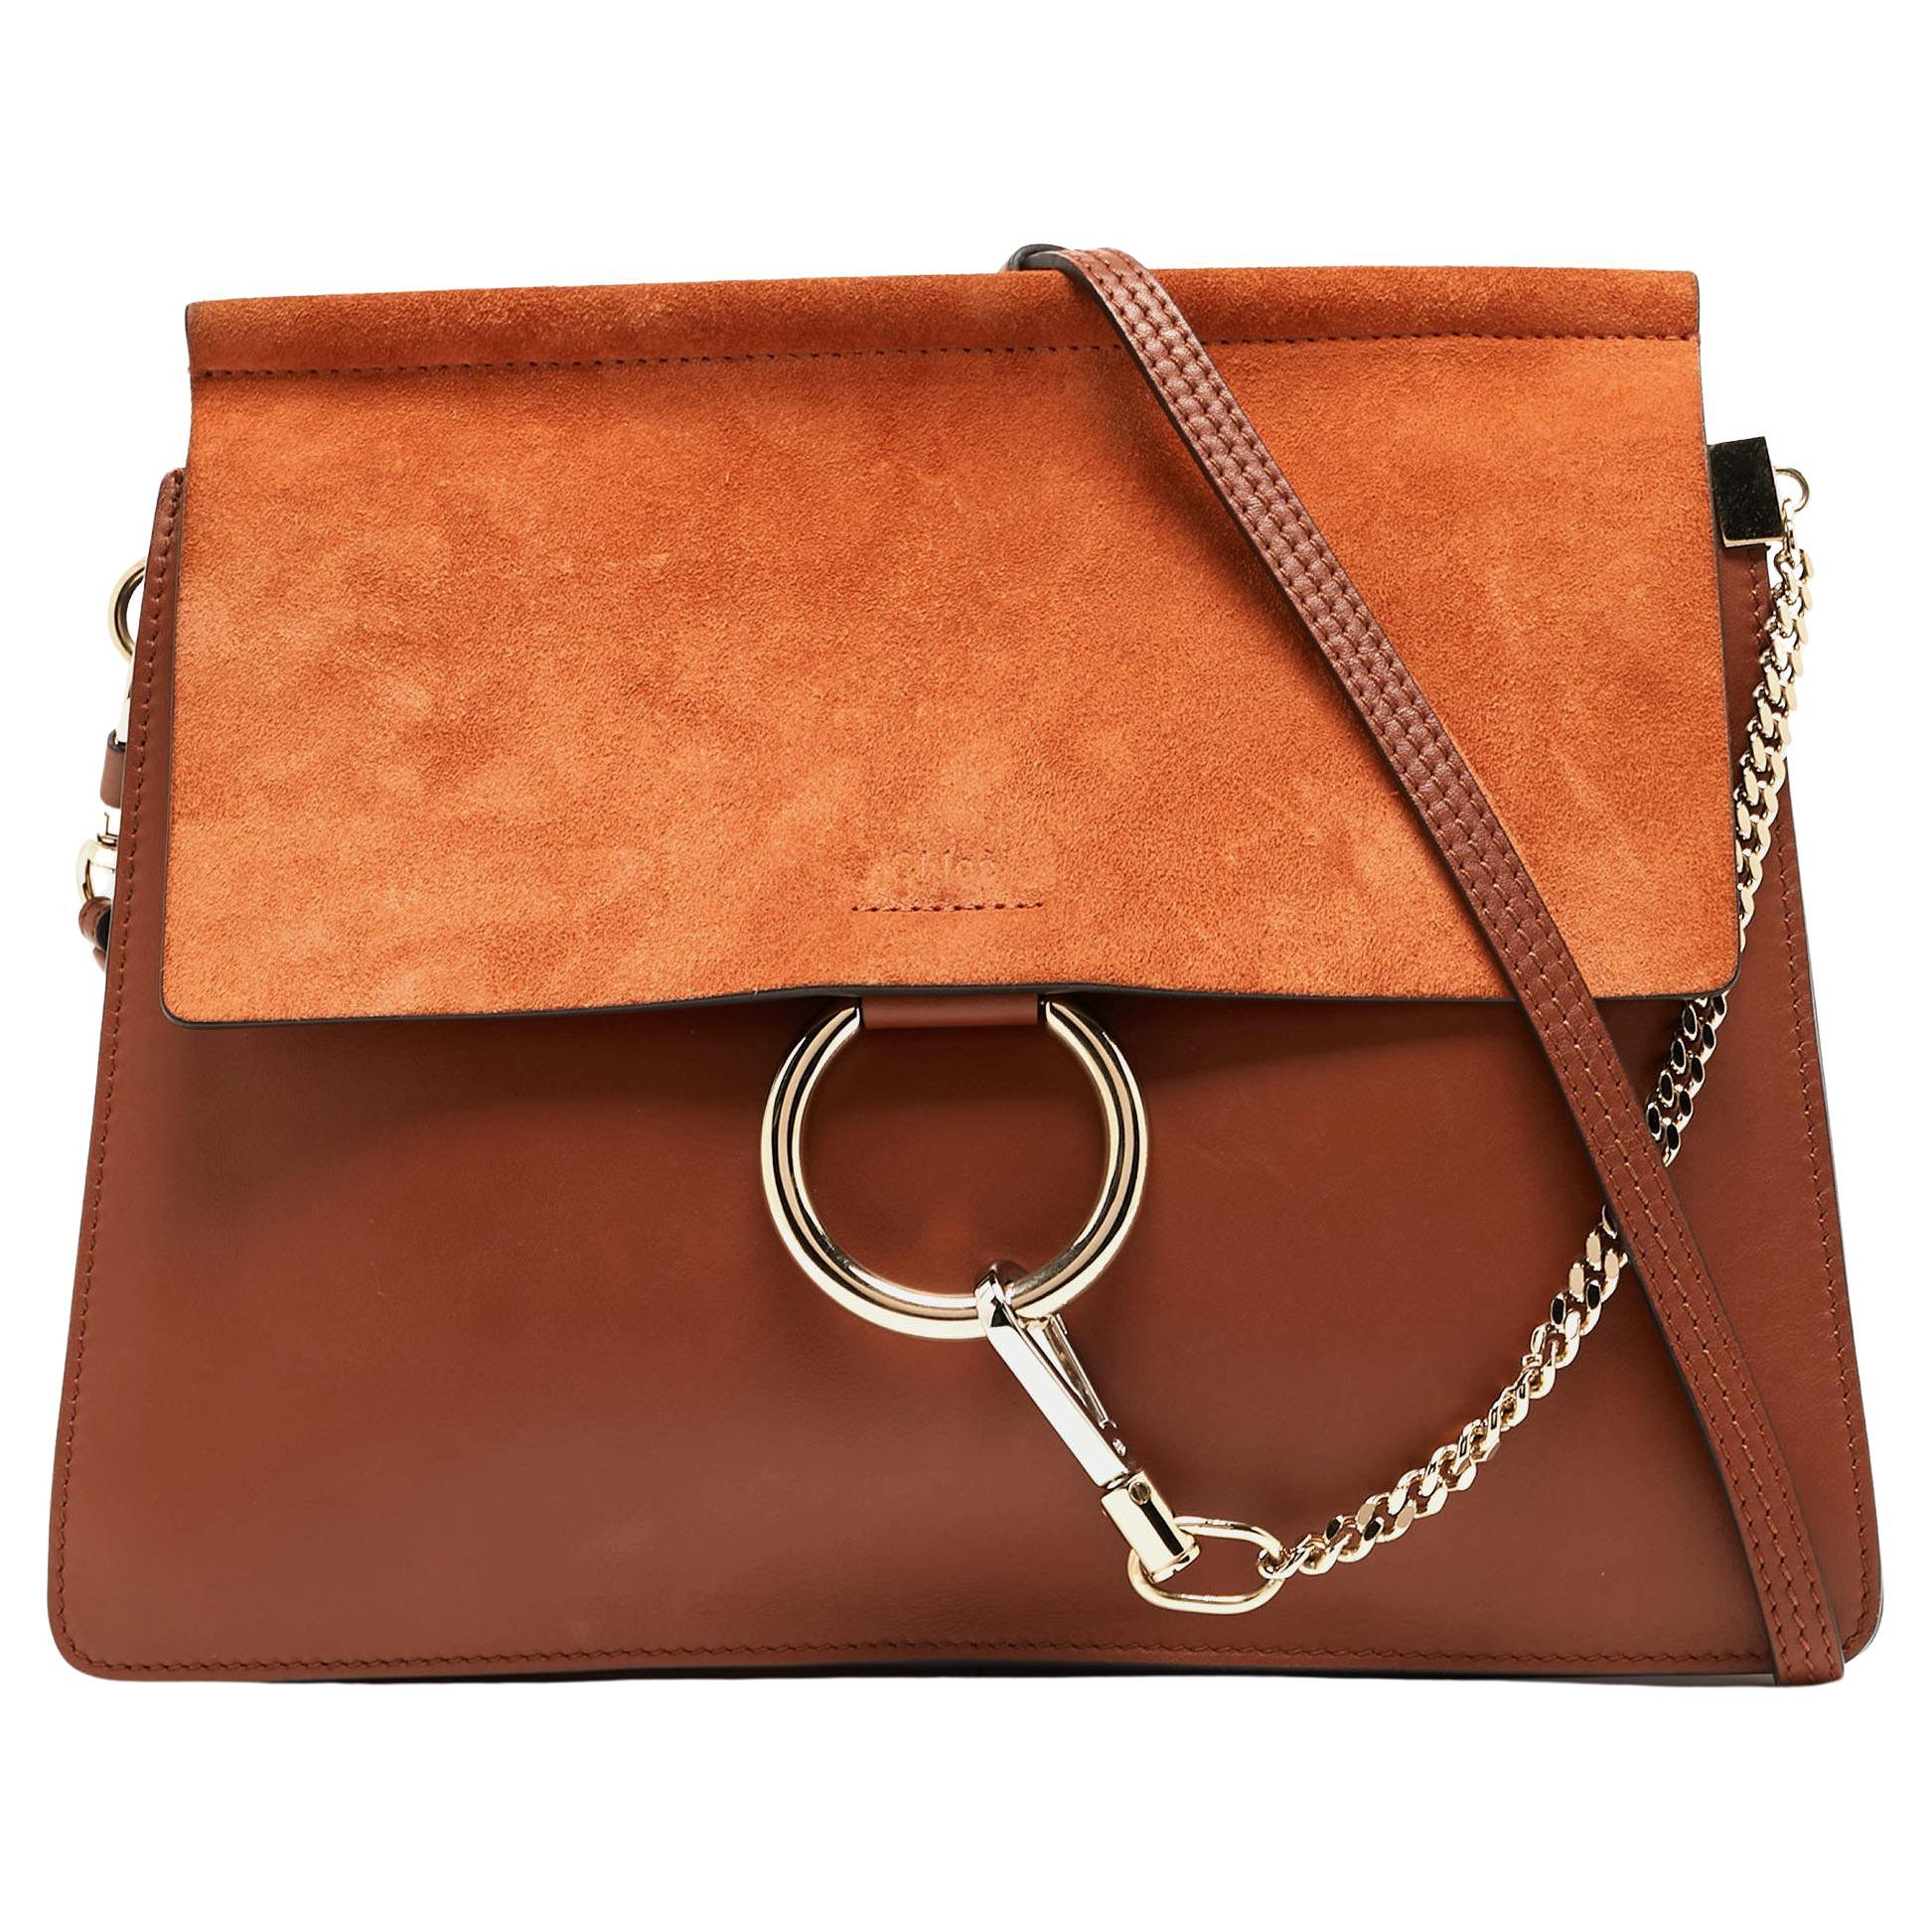 Chloe Brown Leather and Suede Medium Faye Shoulder Bag For Sale